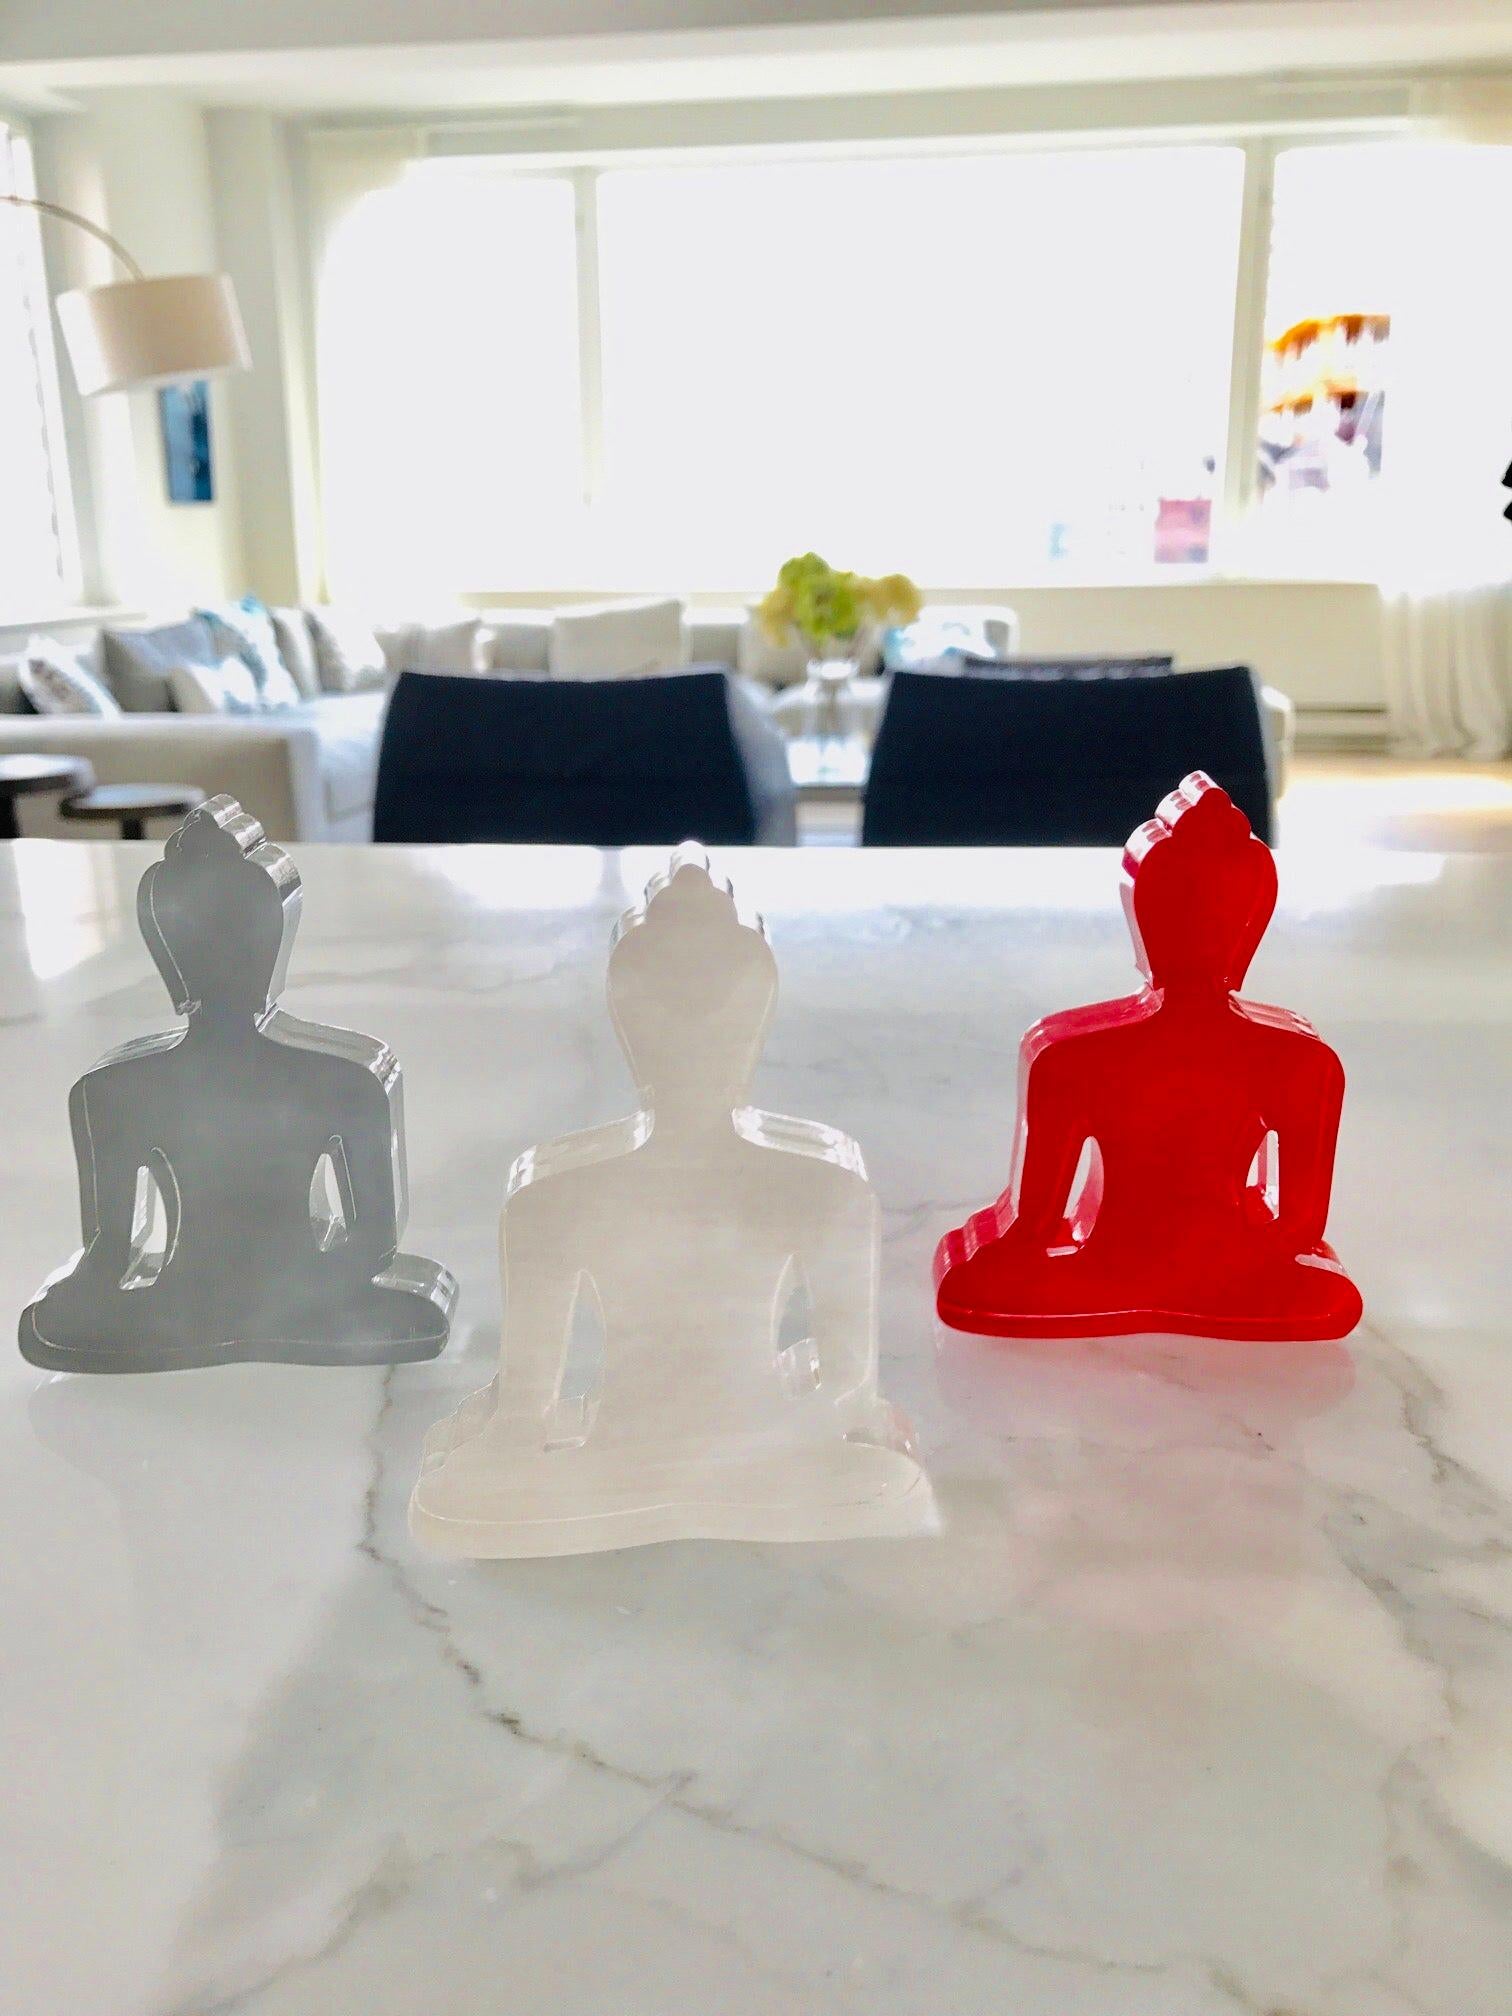 Tal Nehoray Figurative Sculpture - Three Buddhas - White, Red and Grey Buddha sculptures